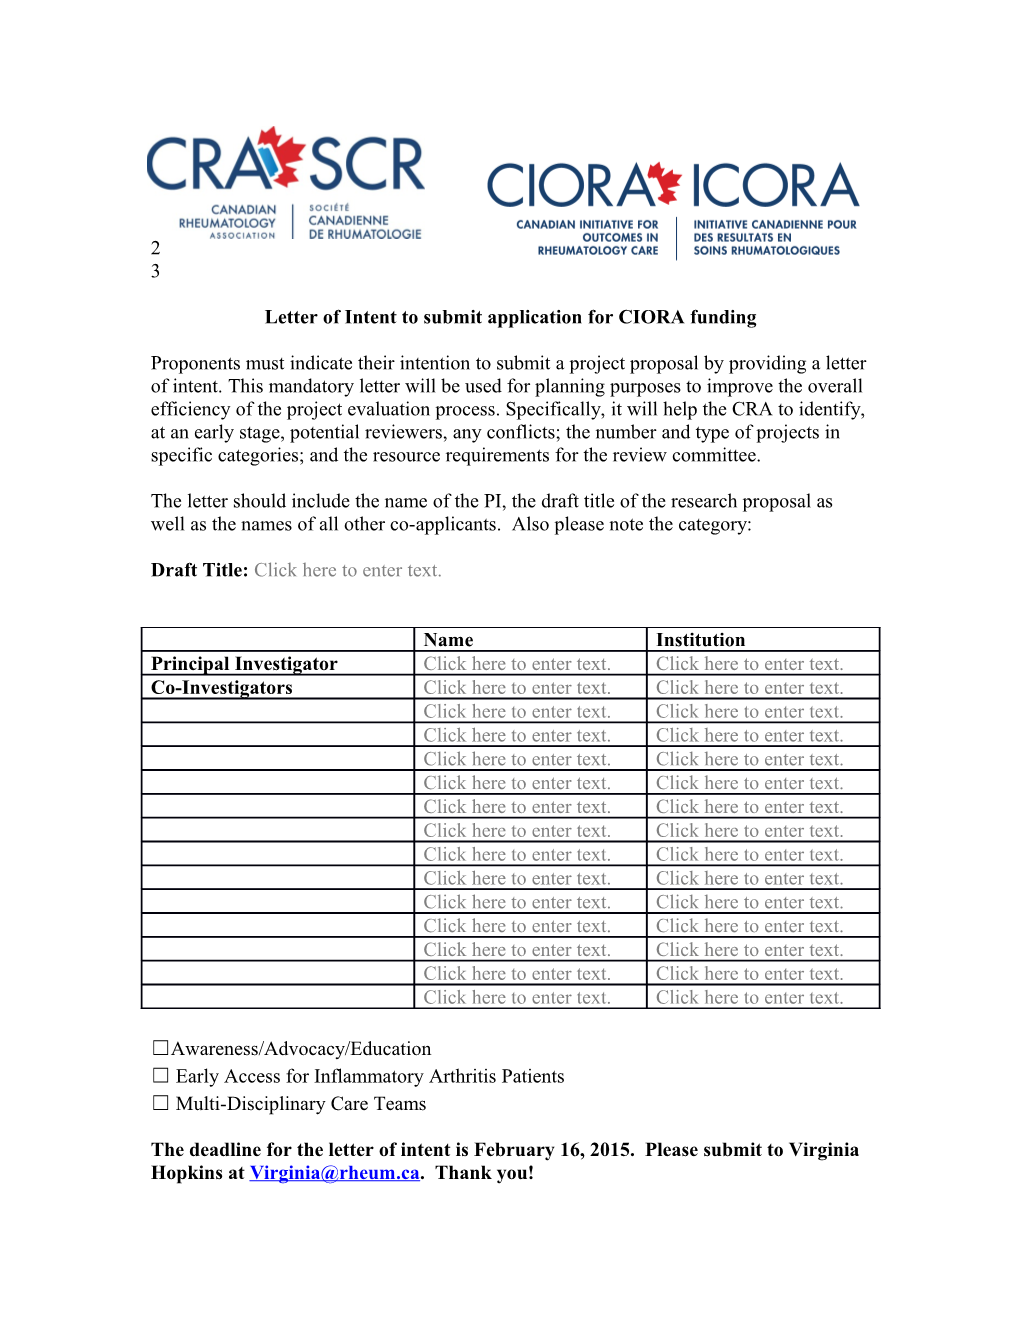 Letter of Intent to Submit Application for CIORA Funding